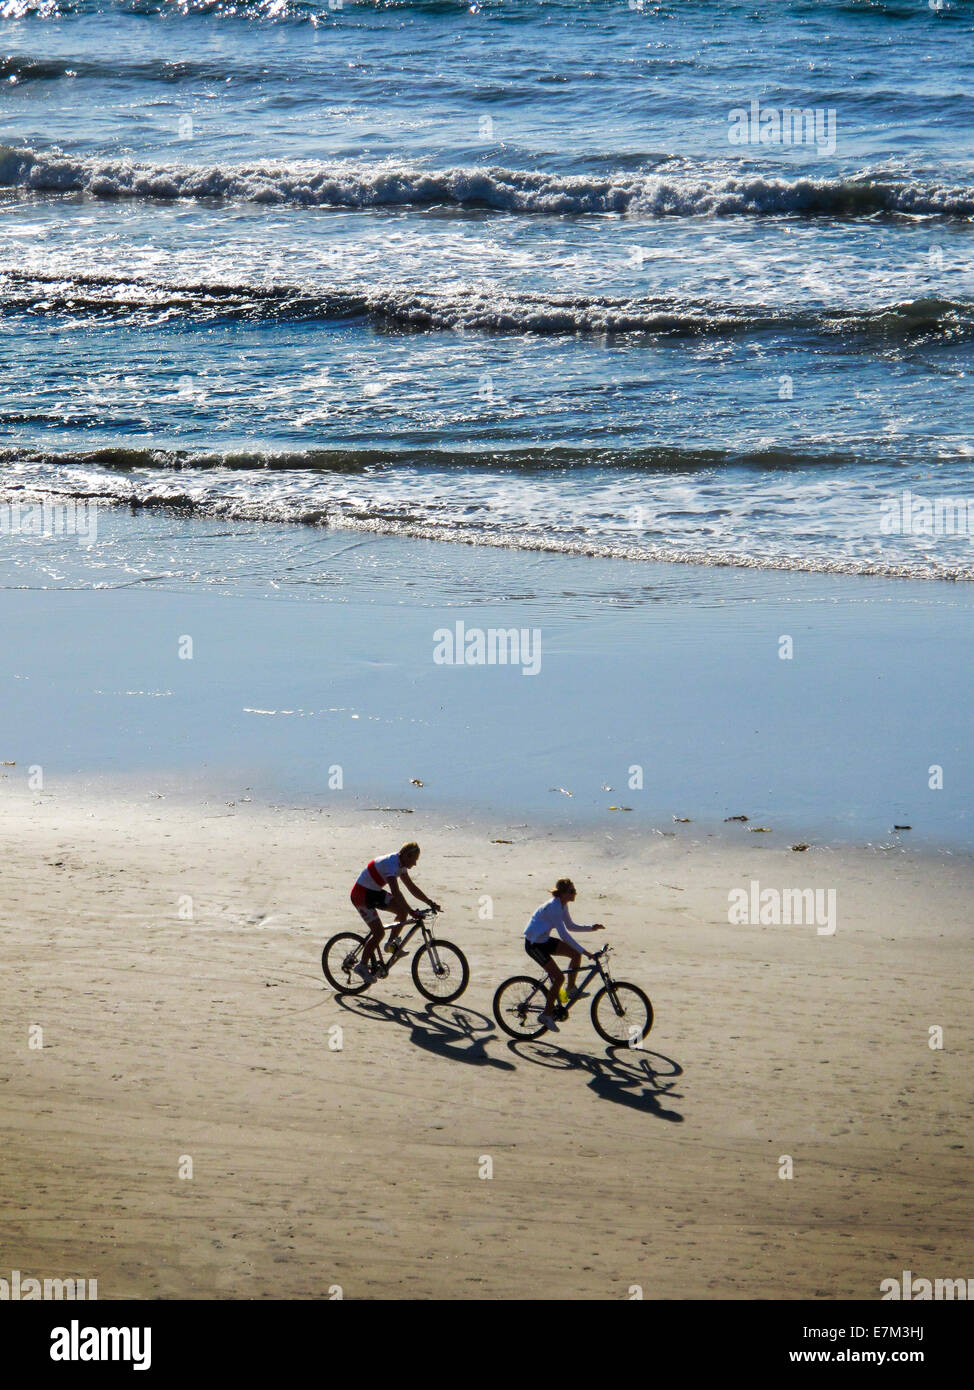 Throwing shadows in the afternoon sunlight, two bicyclists ride next to the Pacific Ocean surf in Laguna Beach, CA. Stock Photo